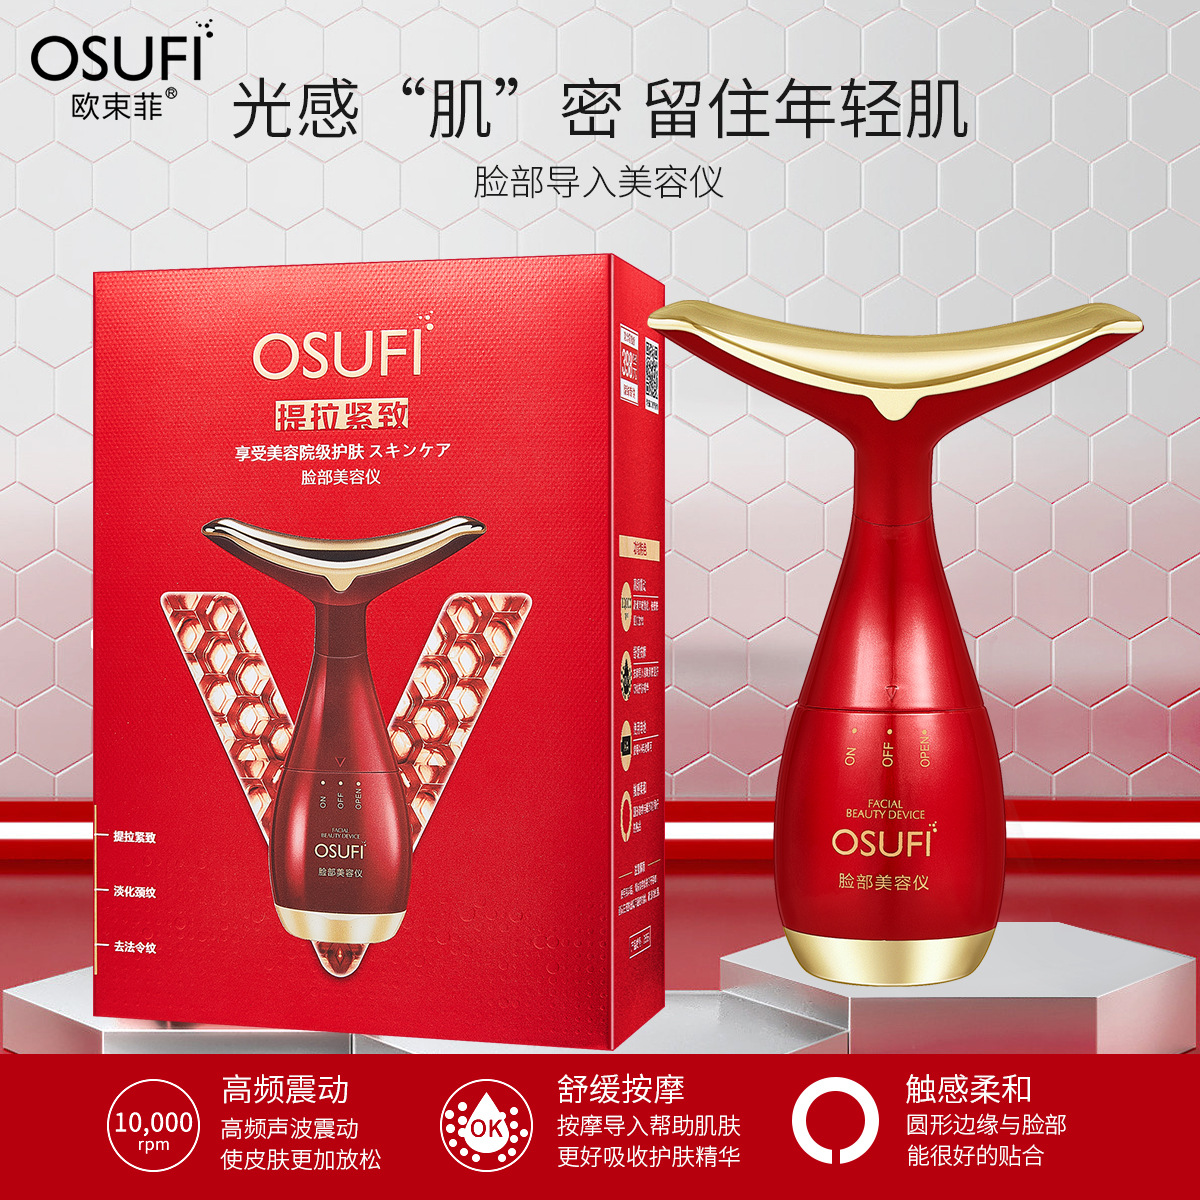 Factory Oubanfei Facial Beauty Apparatus Household Lifting and Tightening Double-Headed V Face Massage Instrument Skin Care Wholesale